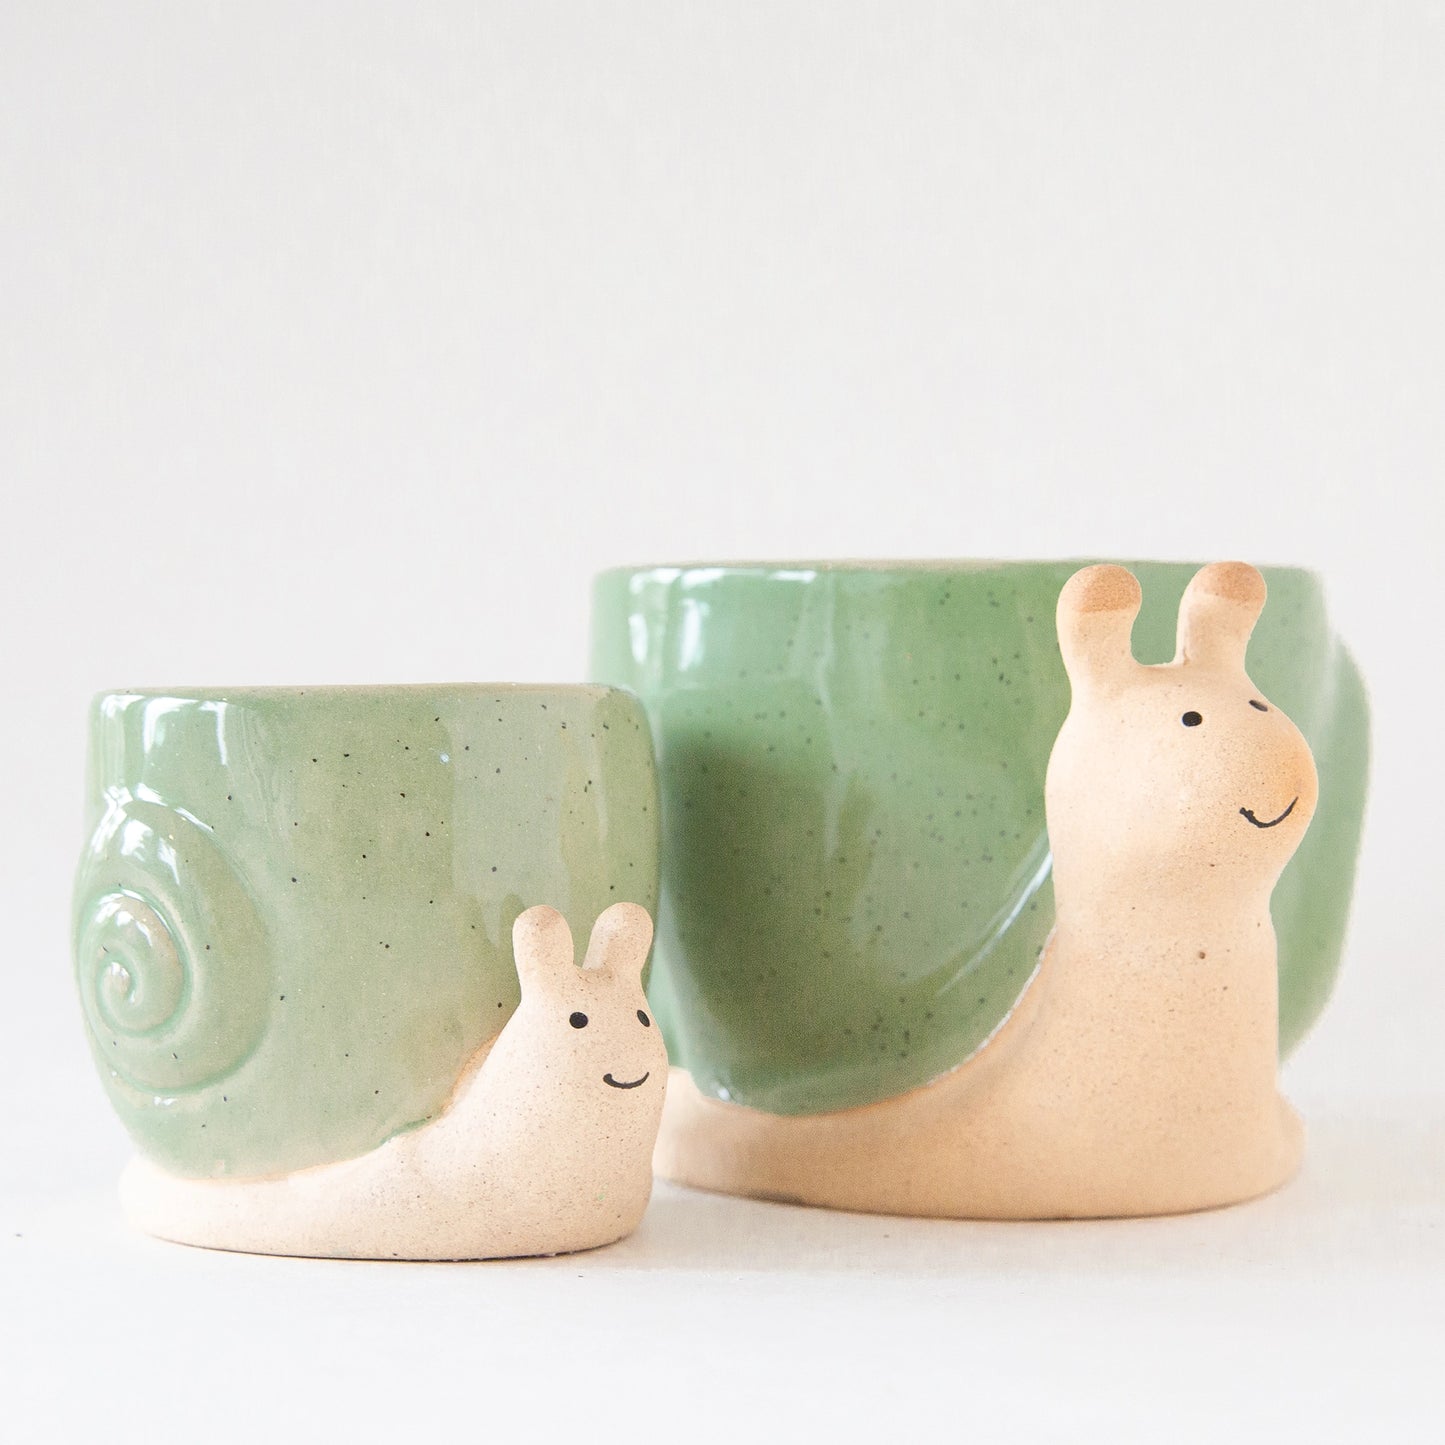 On a light grey background is two ceramic planters in the shape of a snail with smiling faces and a swirly green "shell".